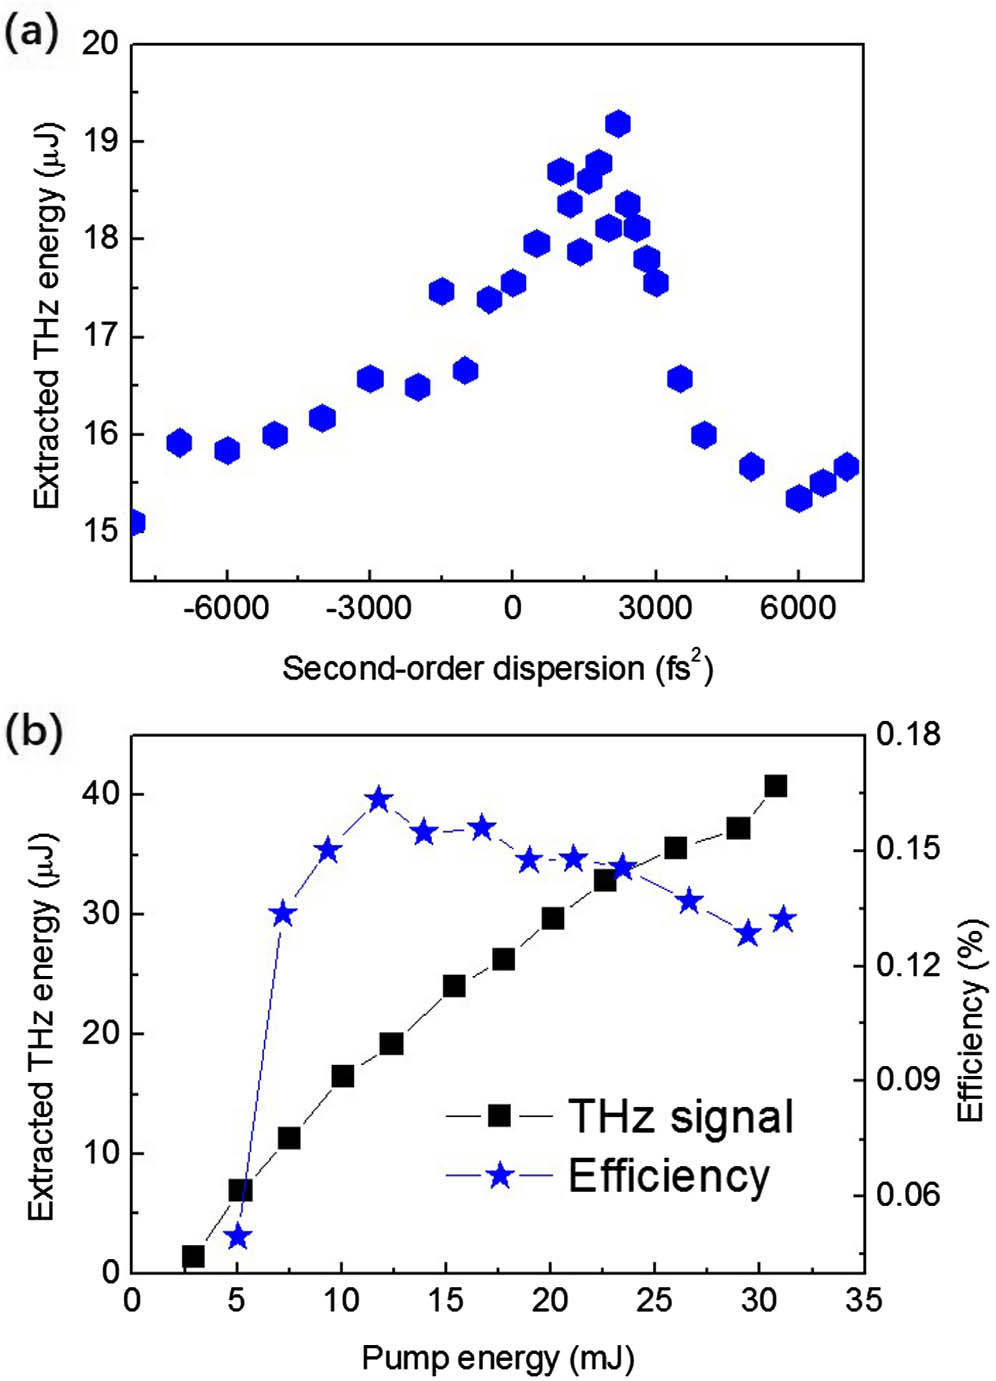 (a) Extracted THz energy as a function of the second-order dispersion at 10 mJ pump energy. (b) Extracted THz energy and its corresponding optical-to-THz energy conversion efficiency for different pump energies at a chirped pulse duration of 187 fs.